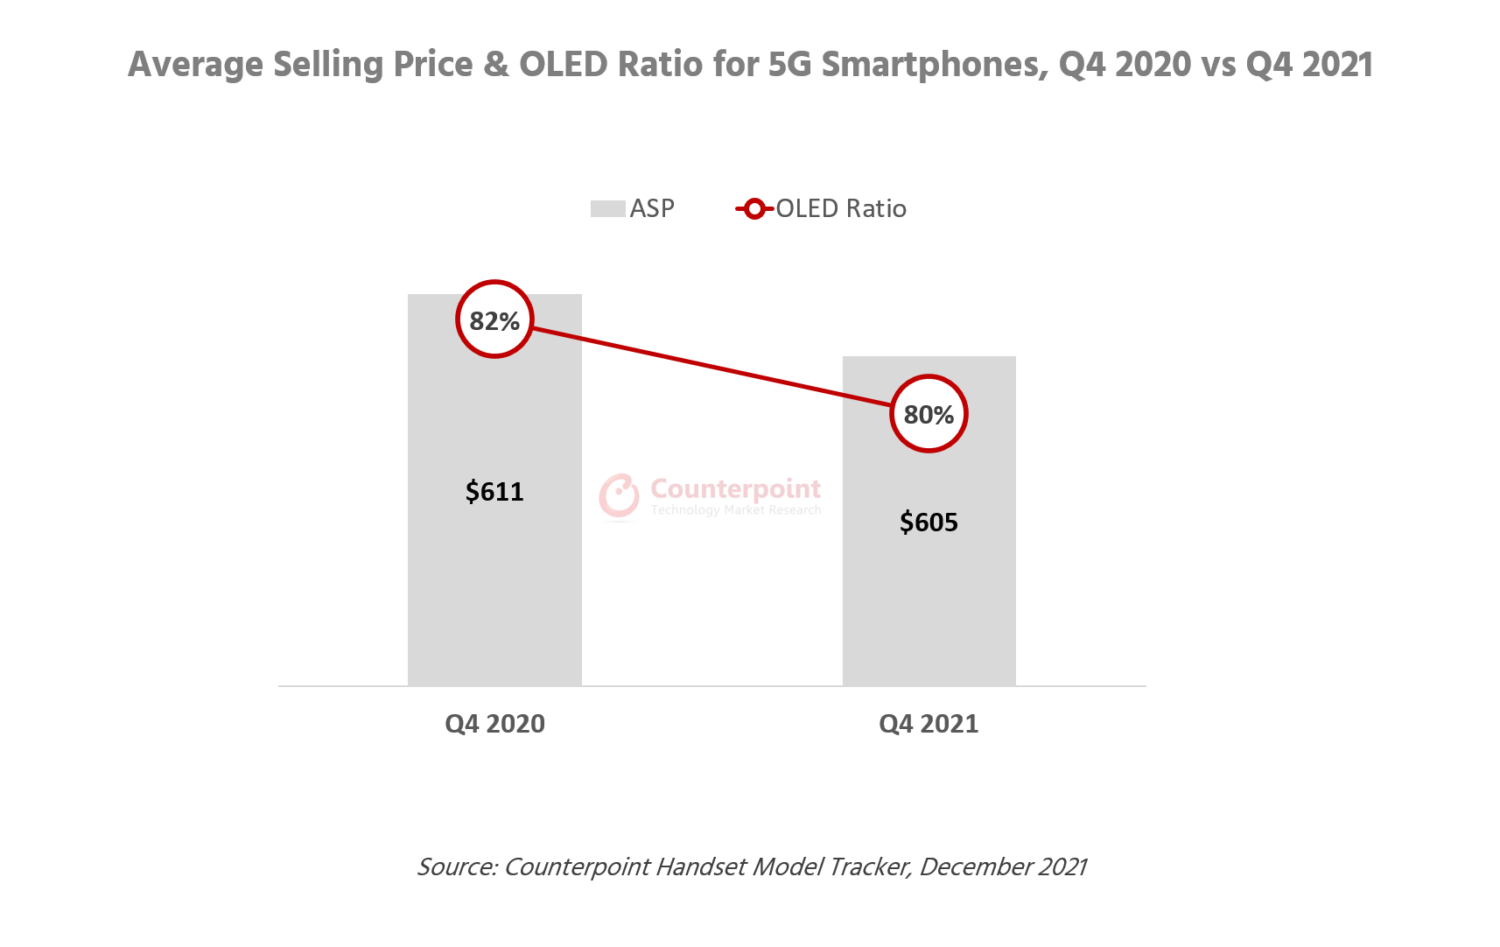 counterpoint research Average Selling Price & OLED Ratio for 5G Smartphones, Q4 2020 vs Q4 2021